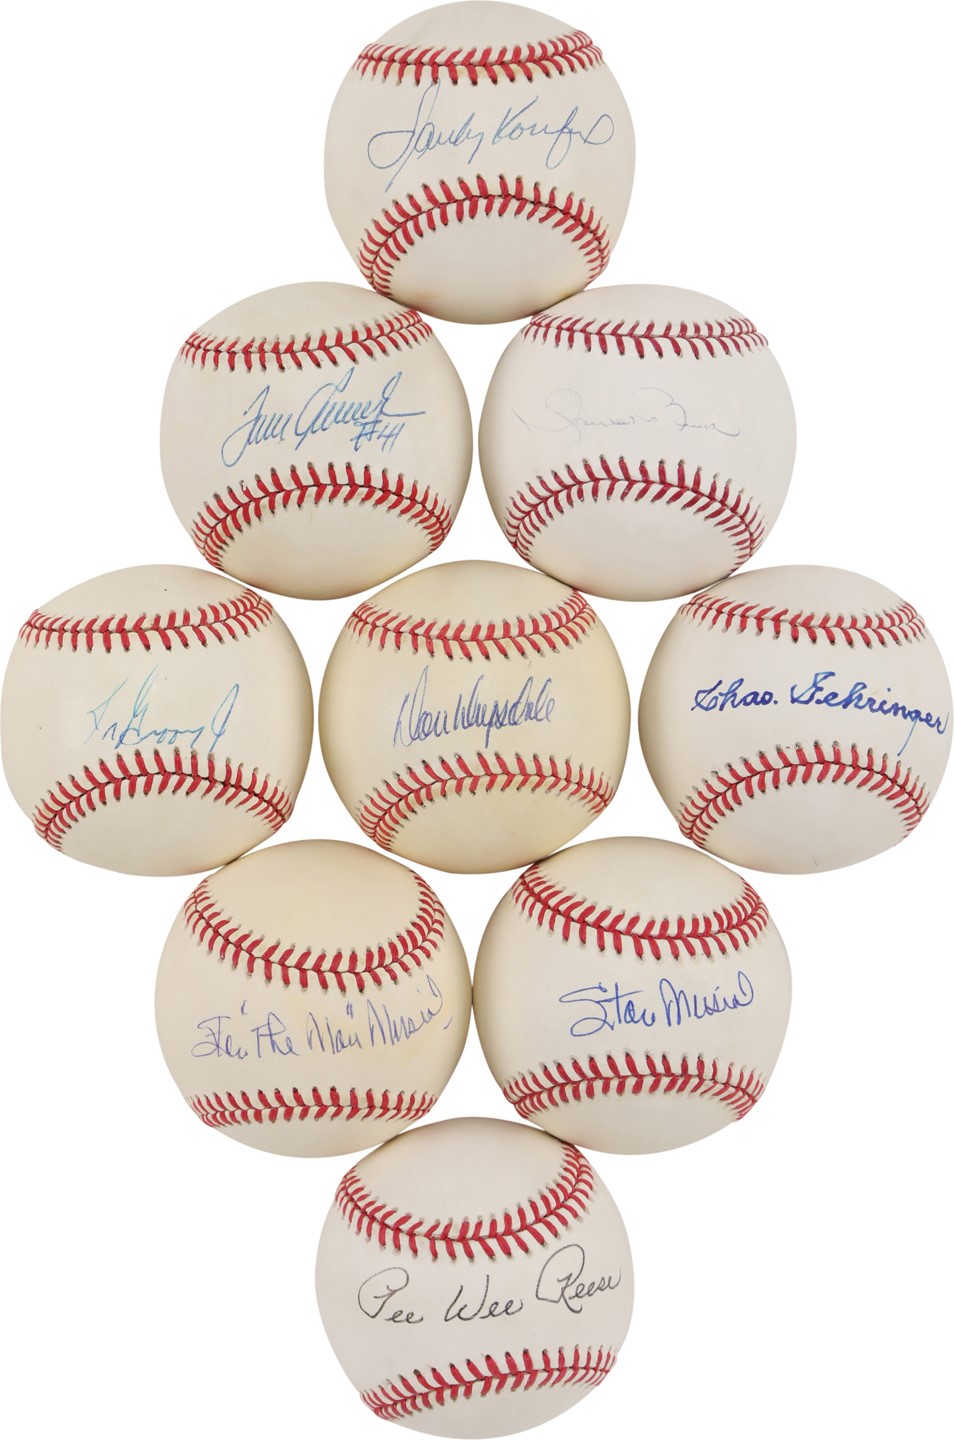 - Hall of Famers and Stars Signed Baseball Collection - Most JSA Certified (46)